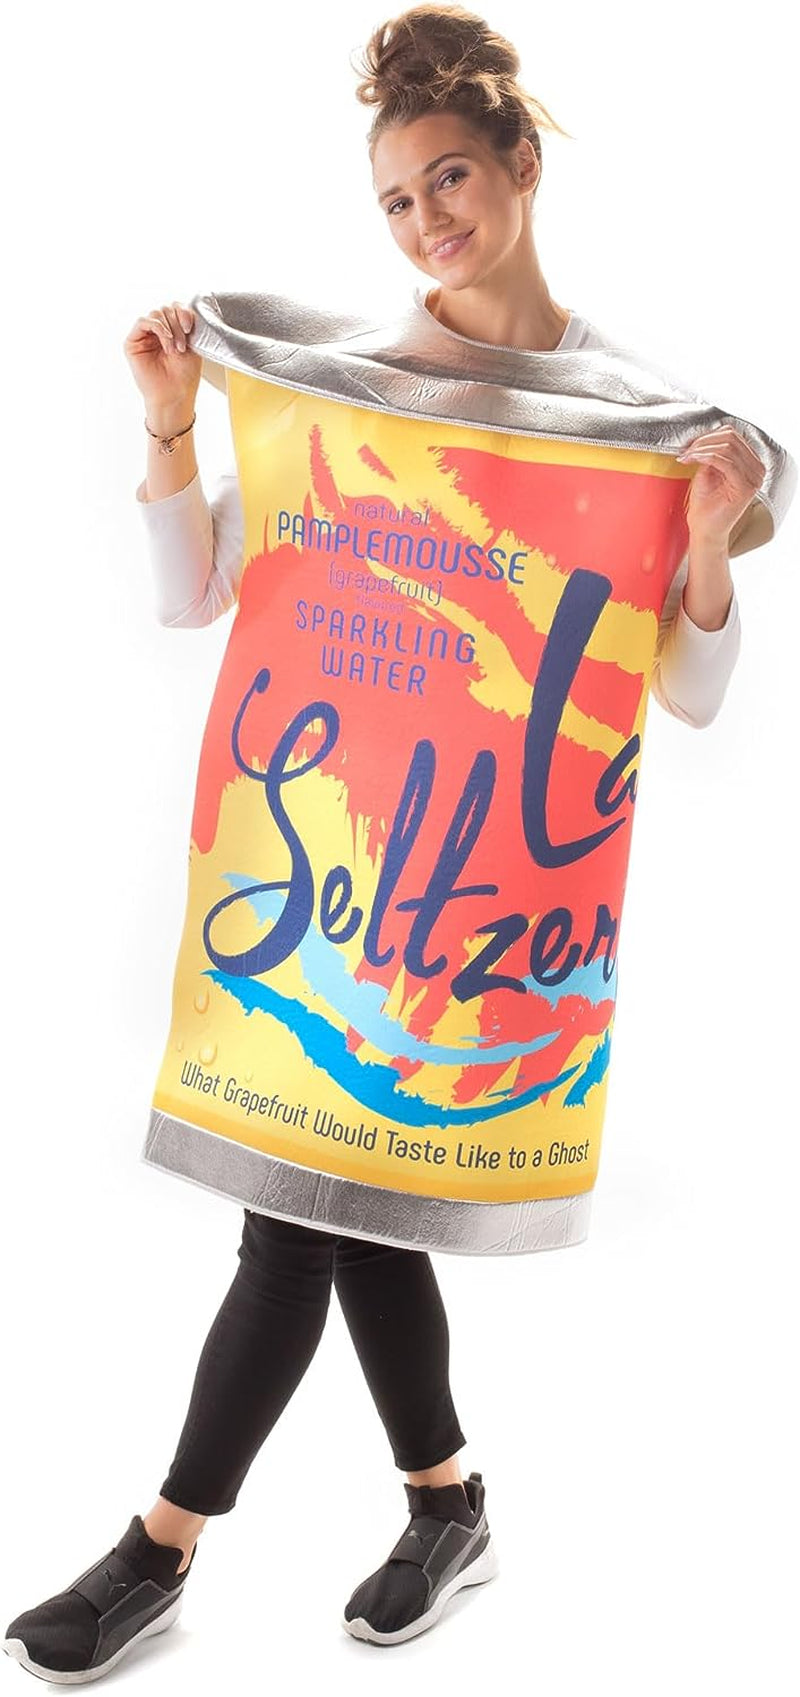 Beverage Can Costume | Slip on Halloween Costume for Women and Men| One Size Fits All  Hauntlook Seltzer Can Costume  